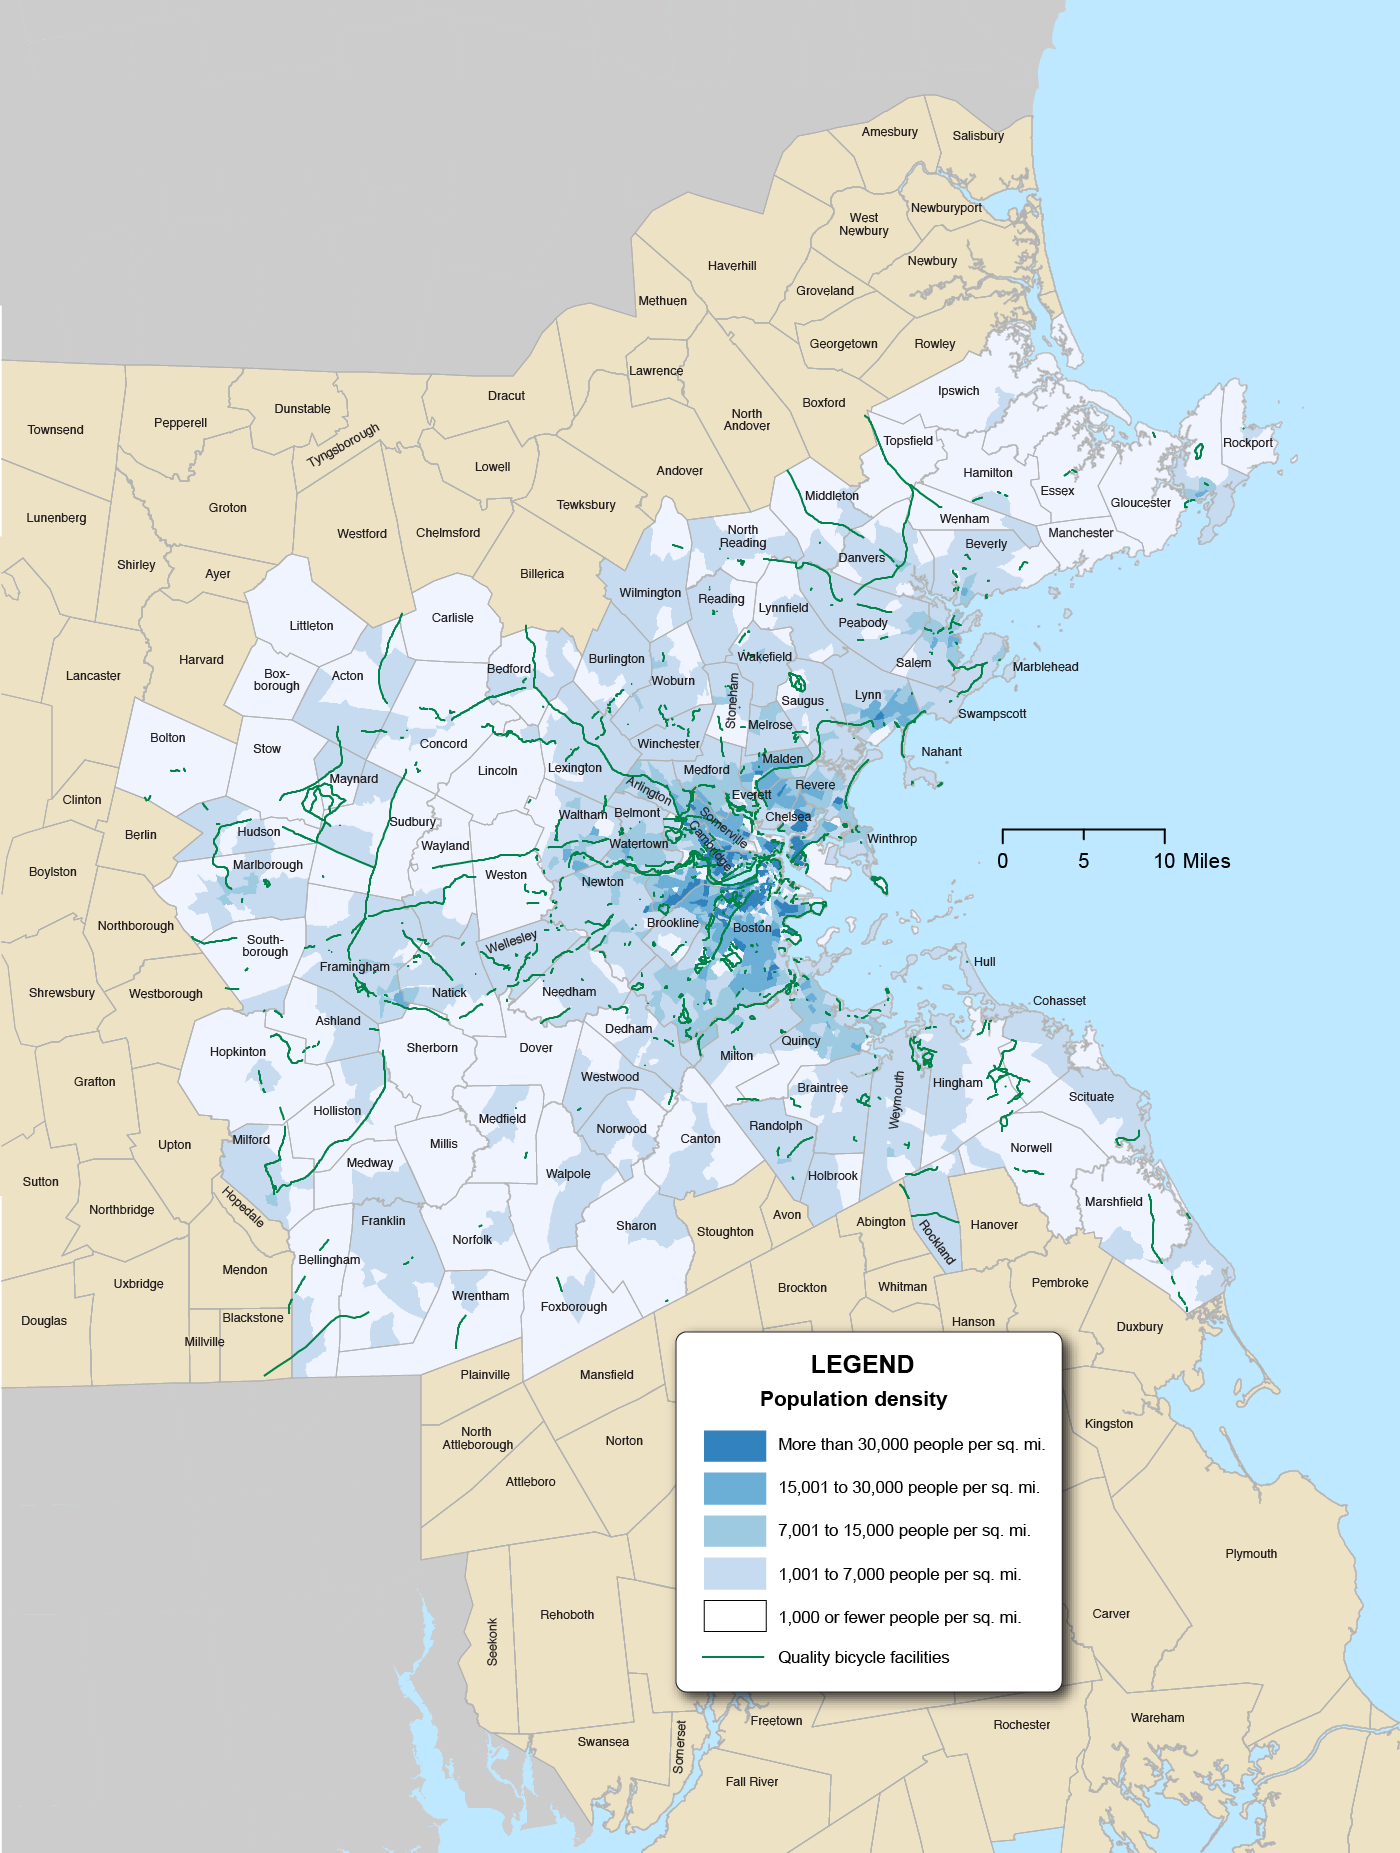 Figure 6-25 is a map of the Boston Region by municipality showing Quality bicycle facilities overlaid with population density per square mile.